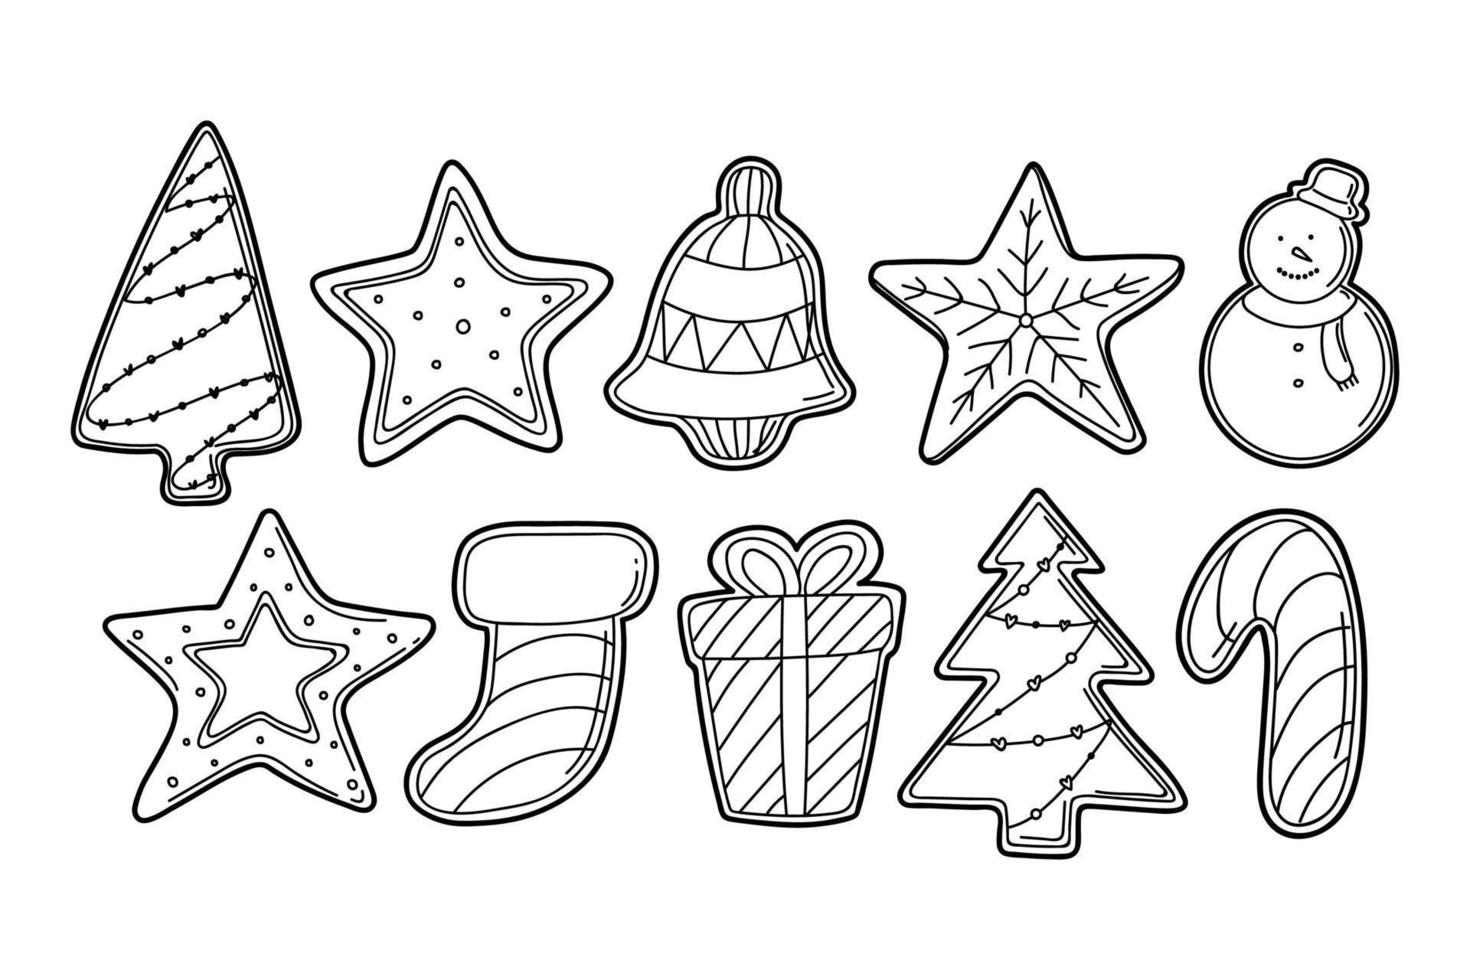 Hand drawn vector doodle set of gingerbread Christmas cookies in black outline for kids coloring book